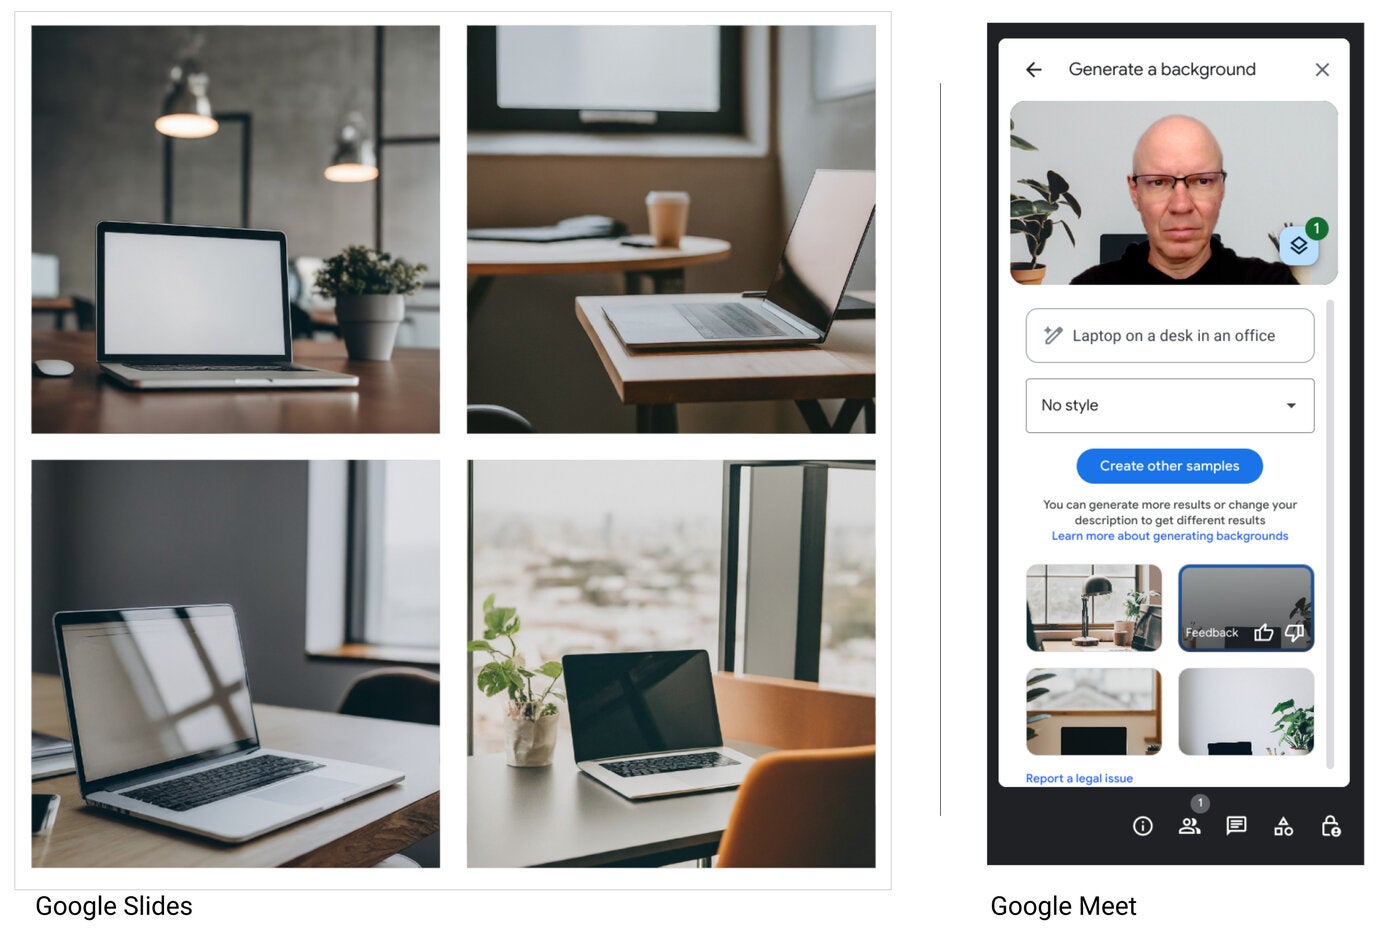 Laptop images generated by Gemini in Google Slides (left) and Google Meet (right)